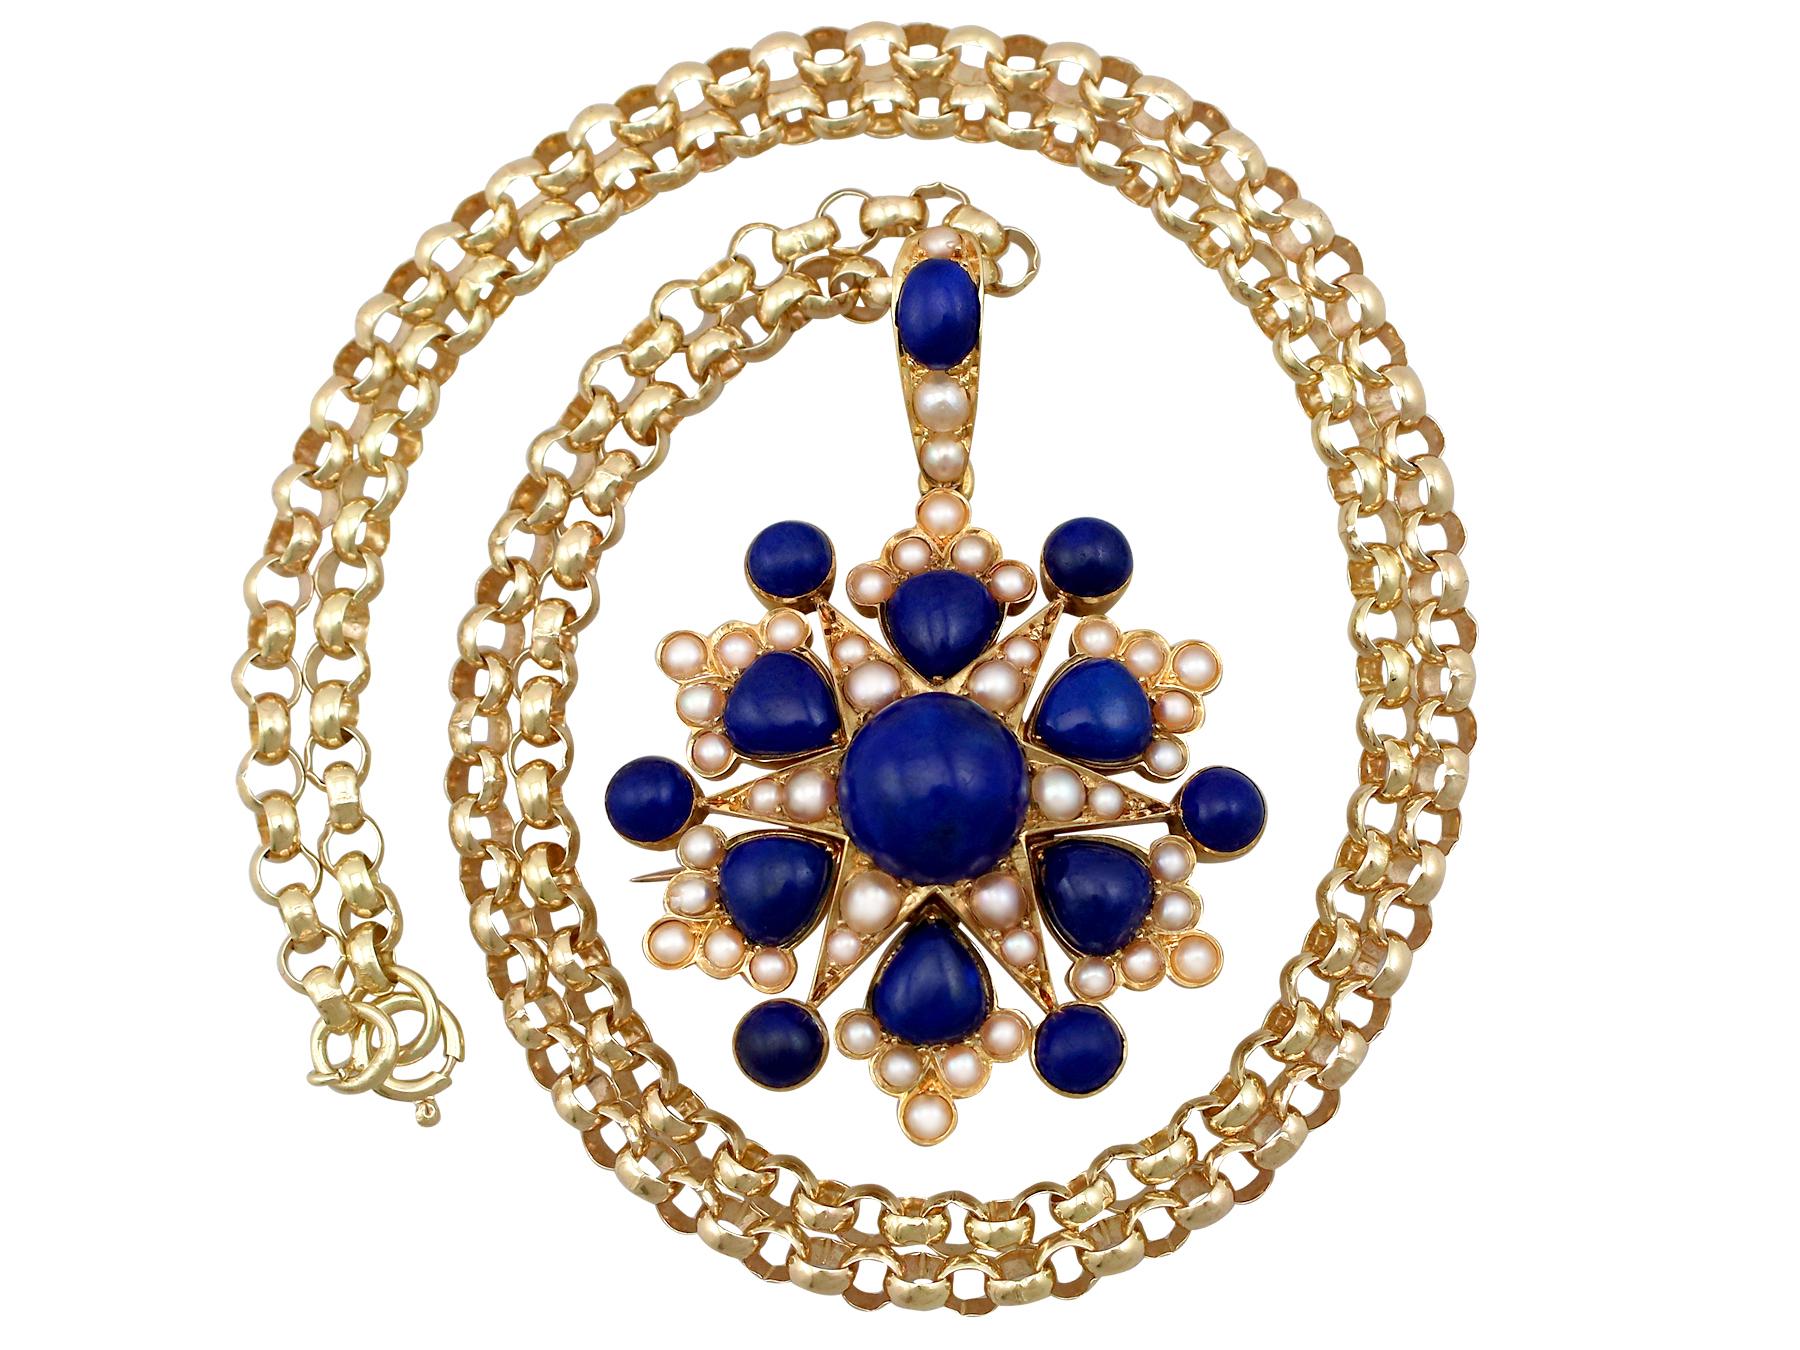 A stunning antique Victorian 13.02 carat lapis lazuli and seed pearl, 18 karat yellow gold pendant / brooch; part of our diverse antique estate jewelry collections.

This stunning, fine and impressive Victorian pendant has been crafted in 18k yellow